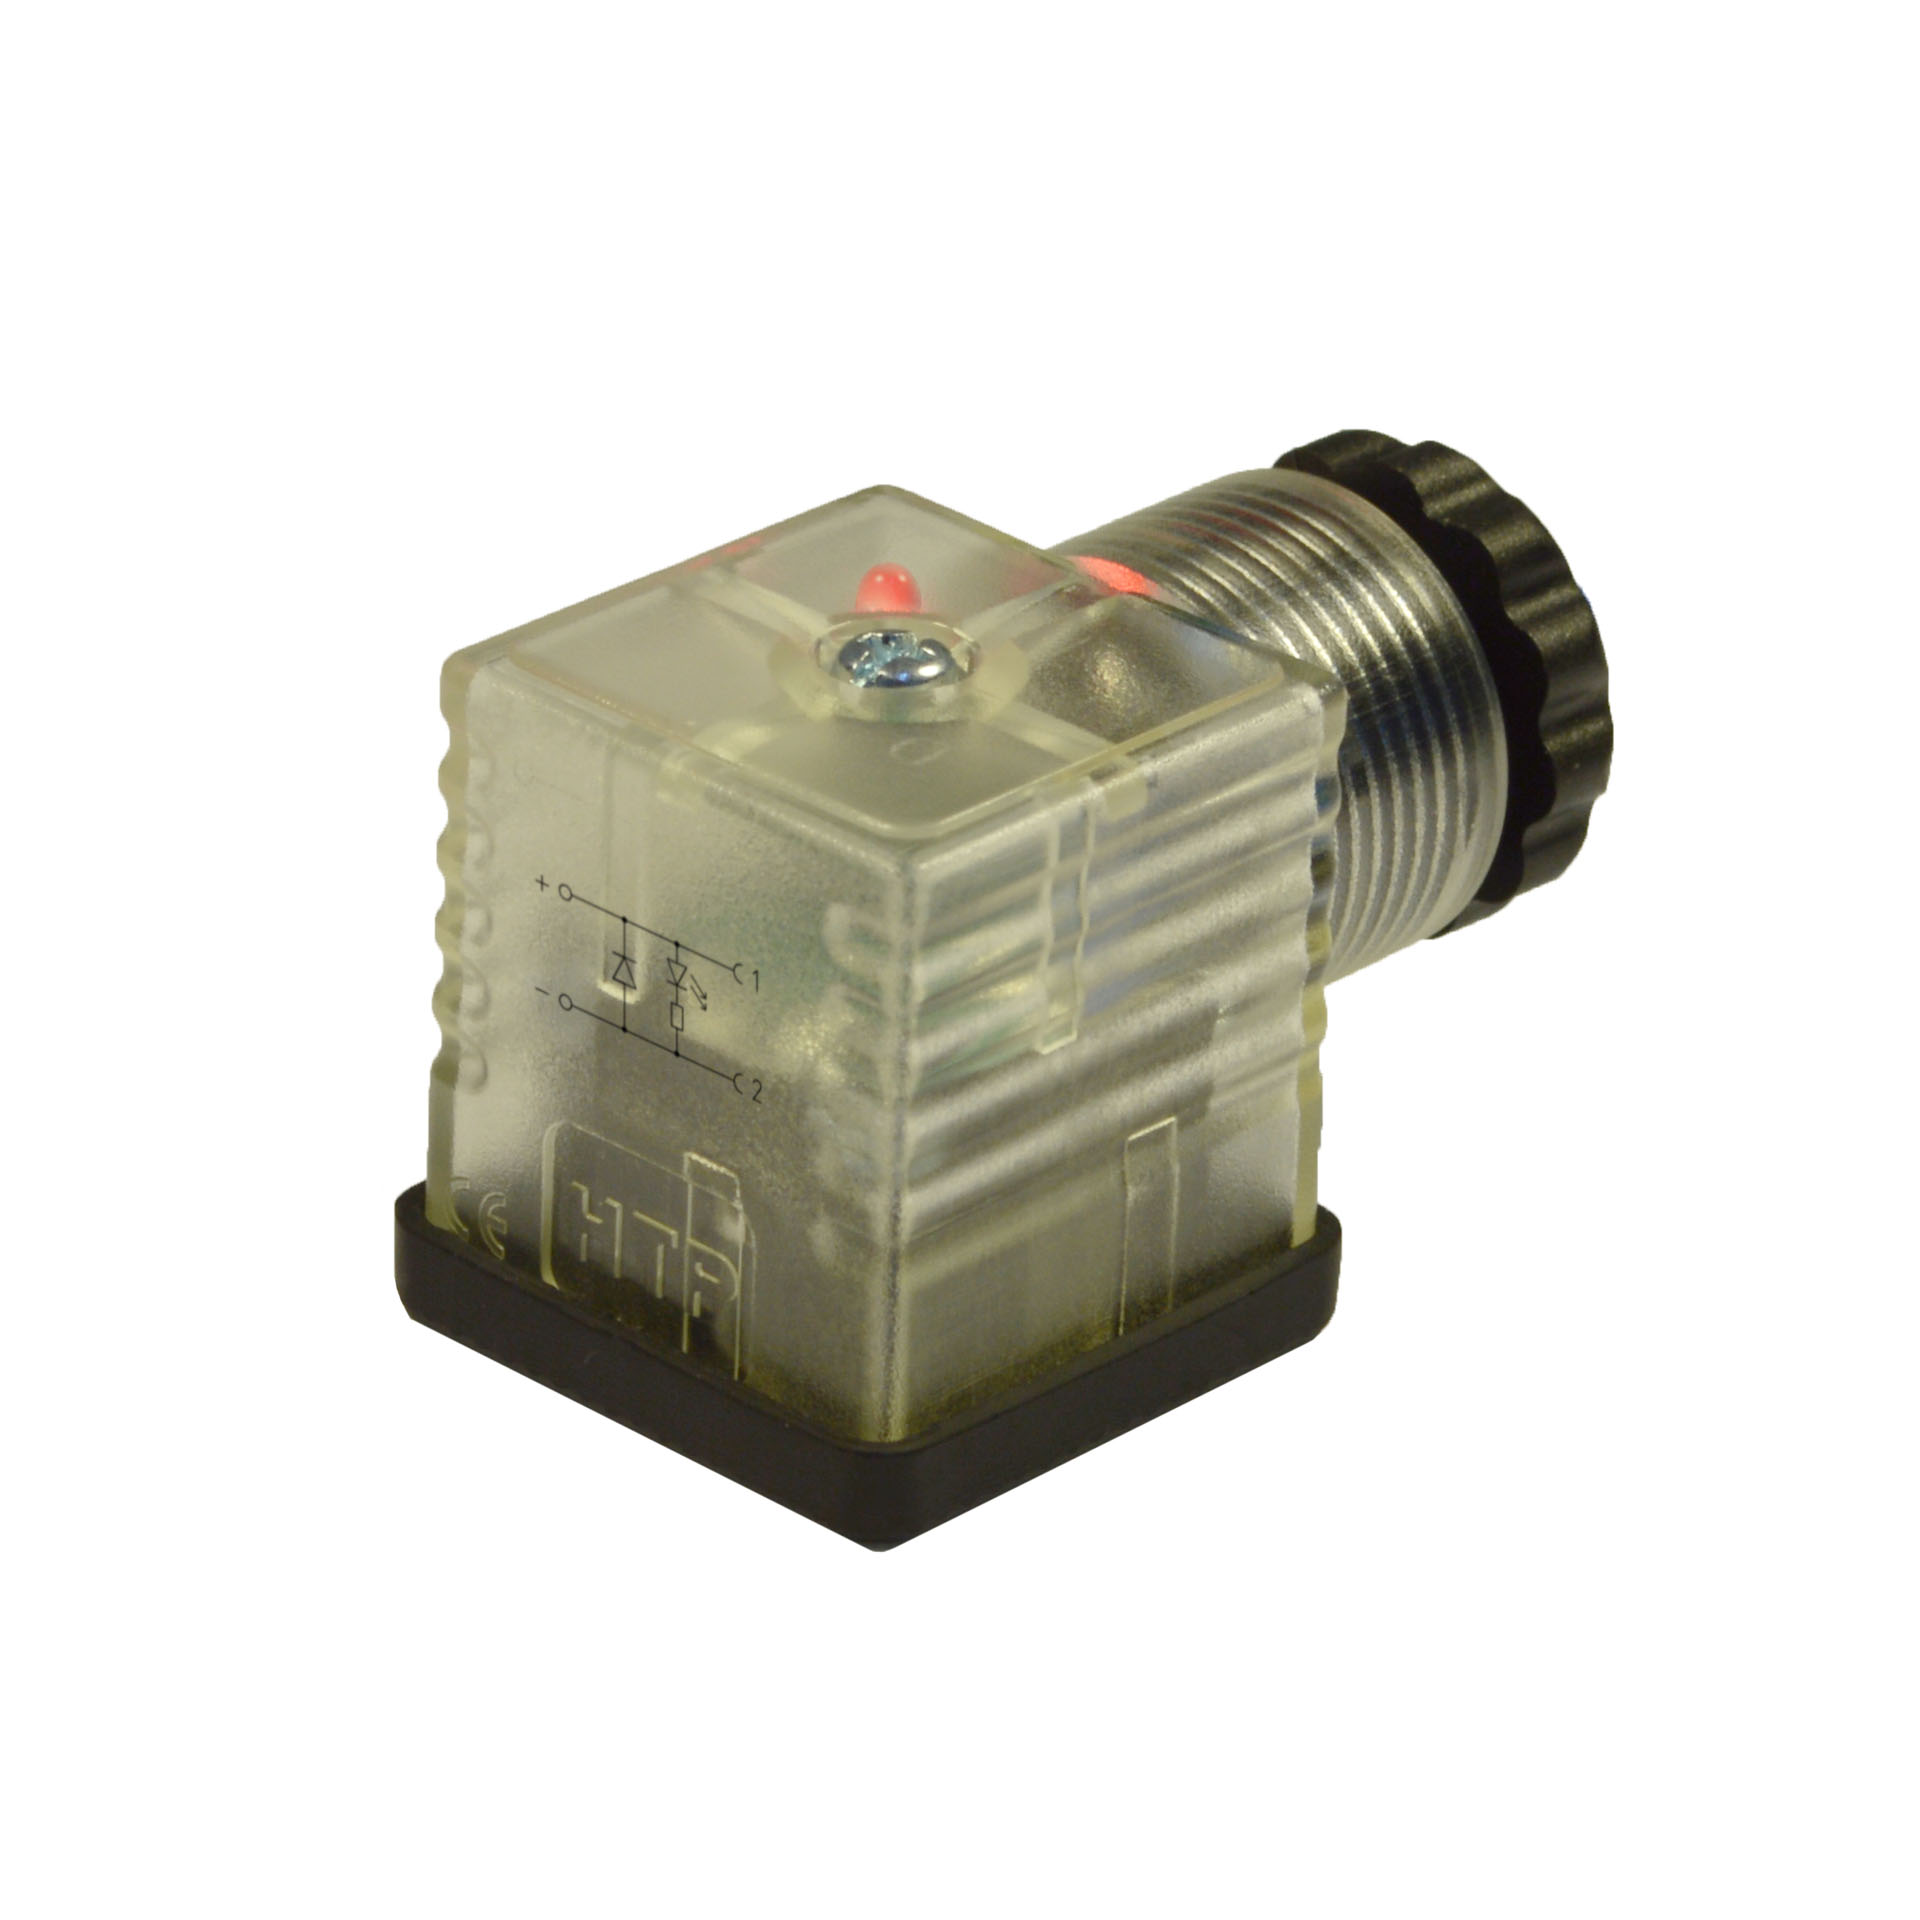 EN175301-803(typeA)field attachable,2p+PE(h.12),Red LED+diode,115VDC,PG9/11unif.